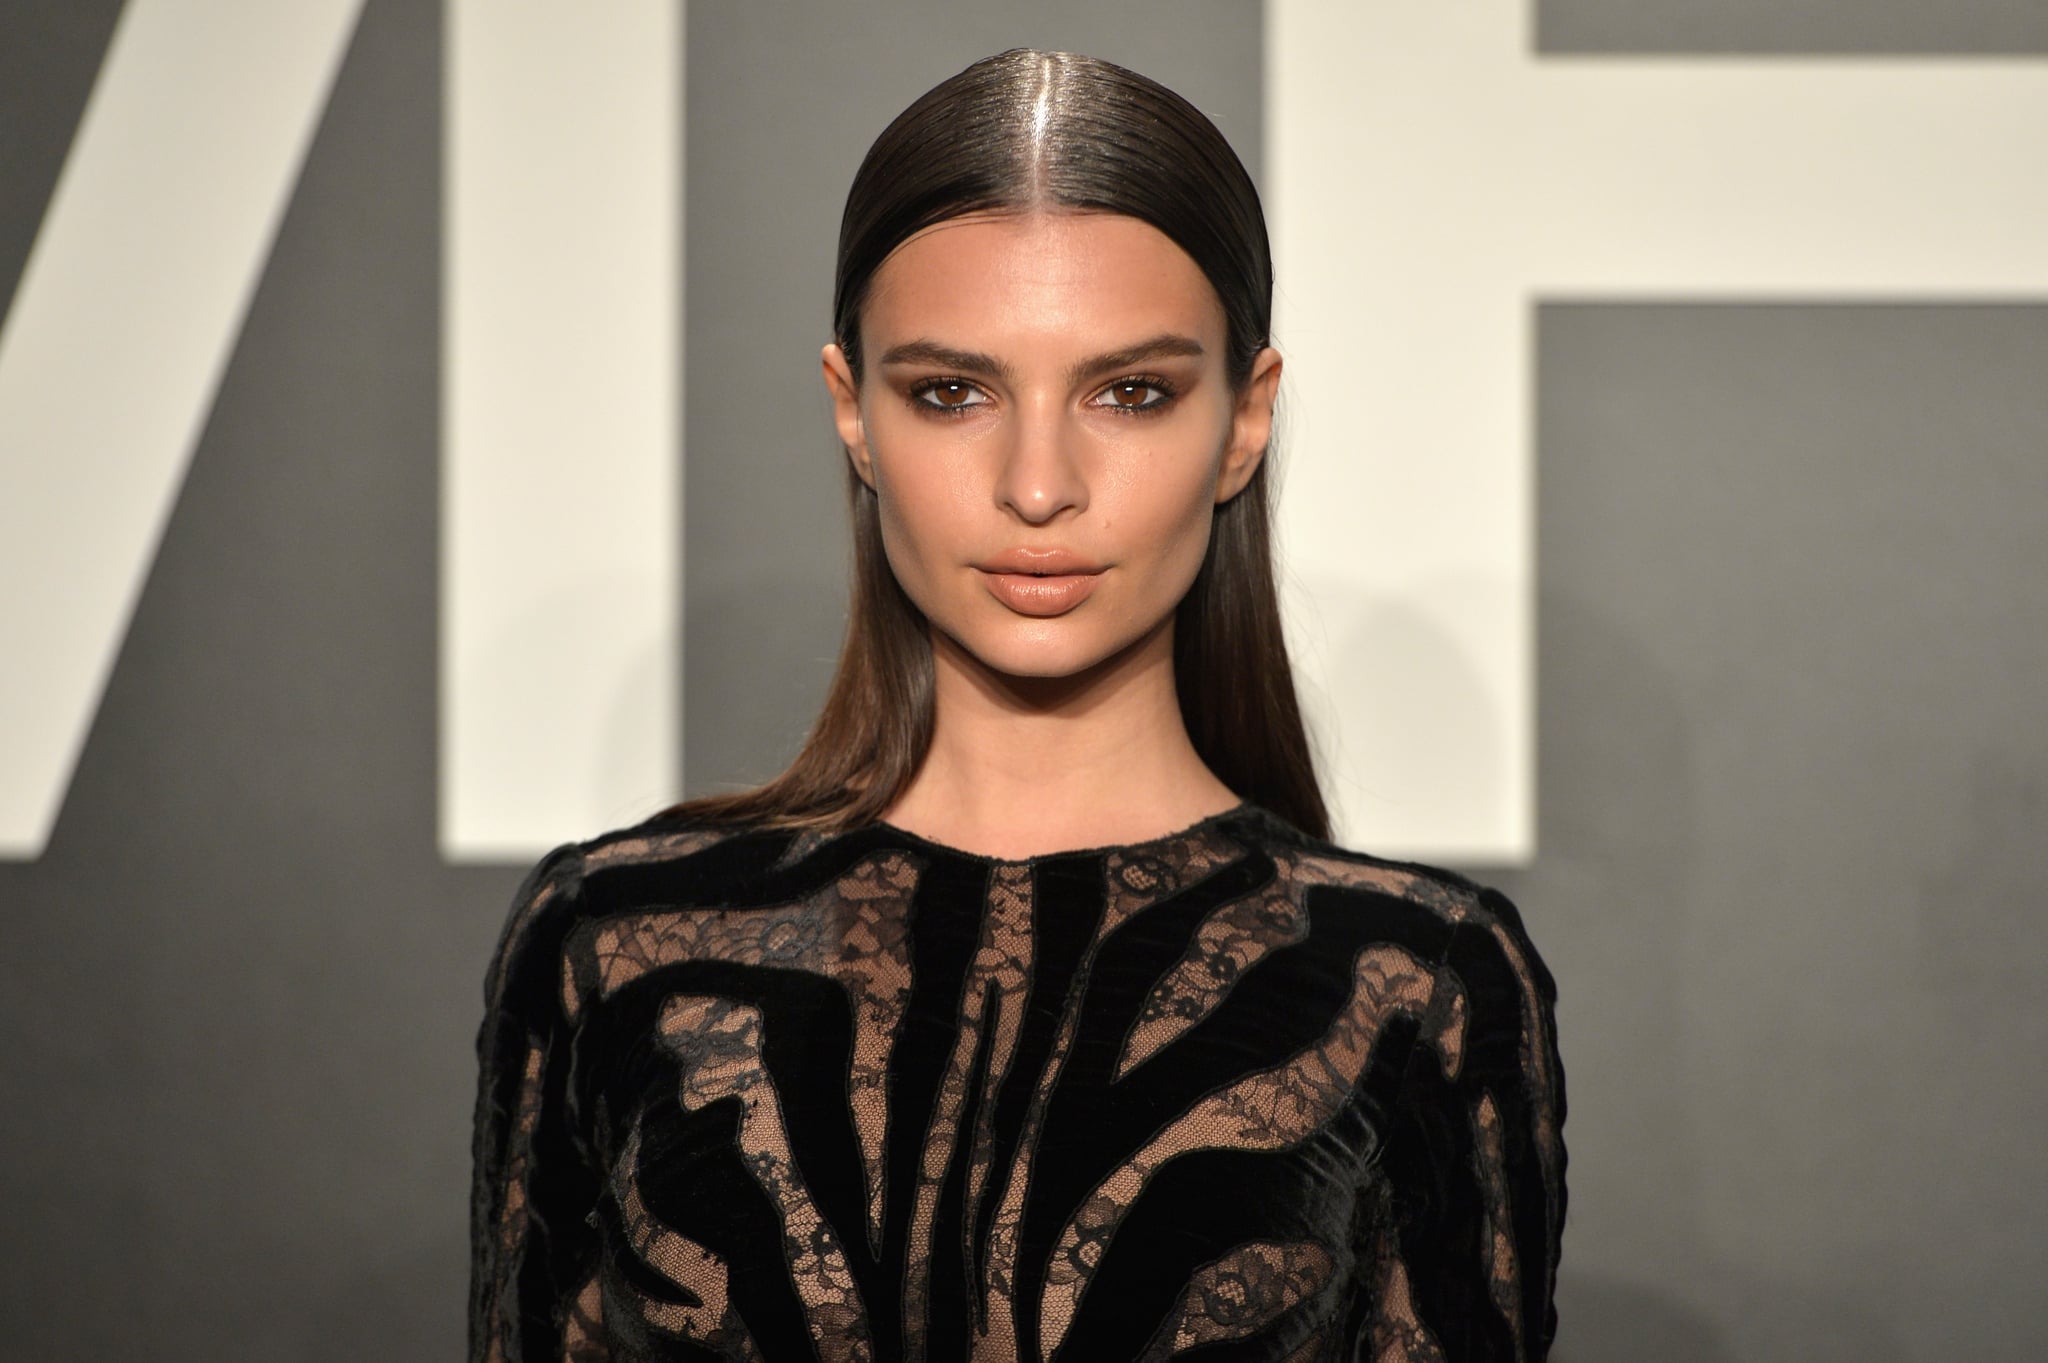 LOS ANGELES, CA - FEBRUARY 20:  Model/actress Emily Ratajkowski, wearing TOM FORD, attends the TOM FORD Autumn/Winter 2015 Womenswear Collection Presentation at Milk Studios in Los Angeles on February 20, 2015.  (Photo by Charley Gallay/Getty Images for Tom Ford)